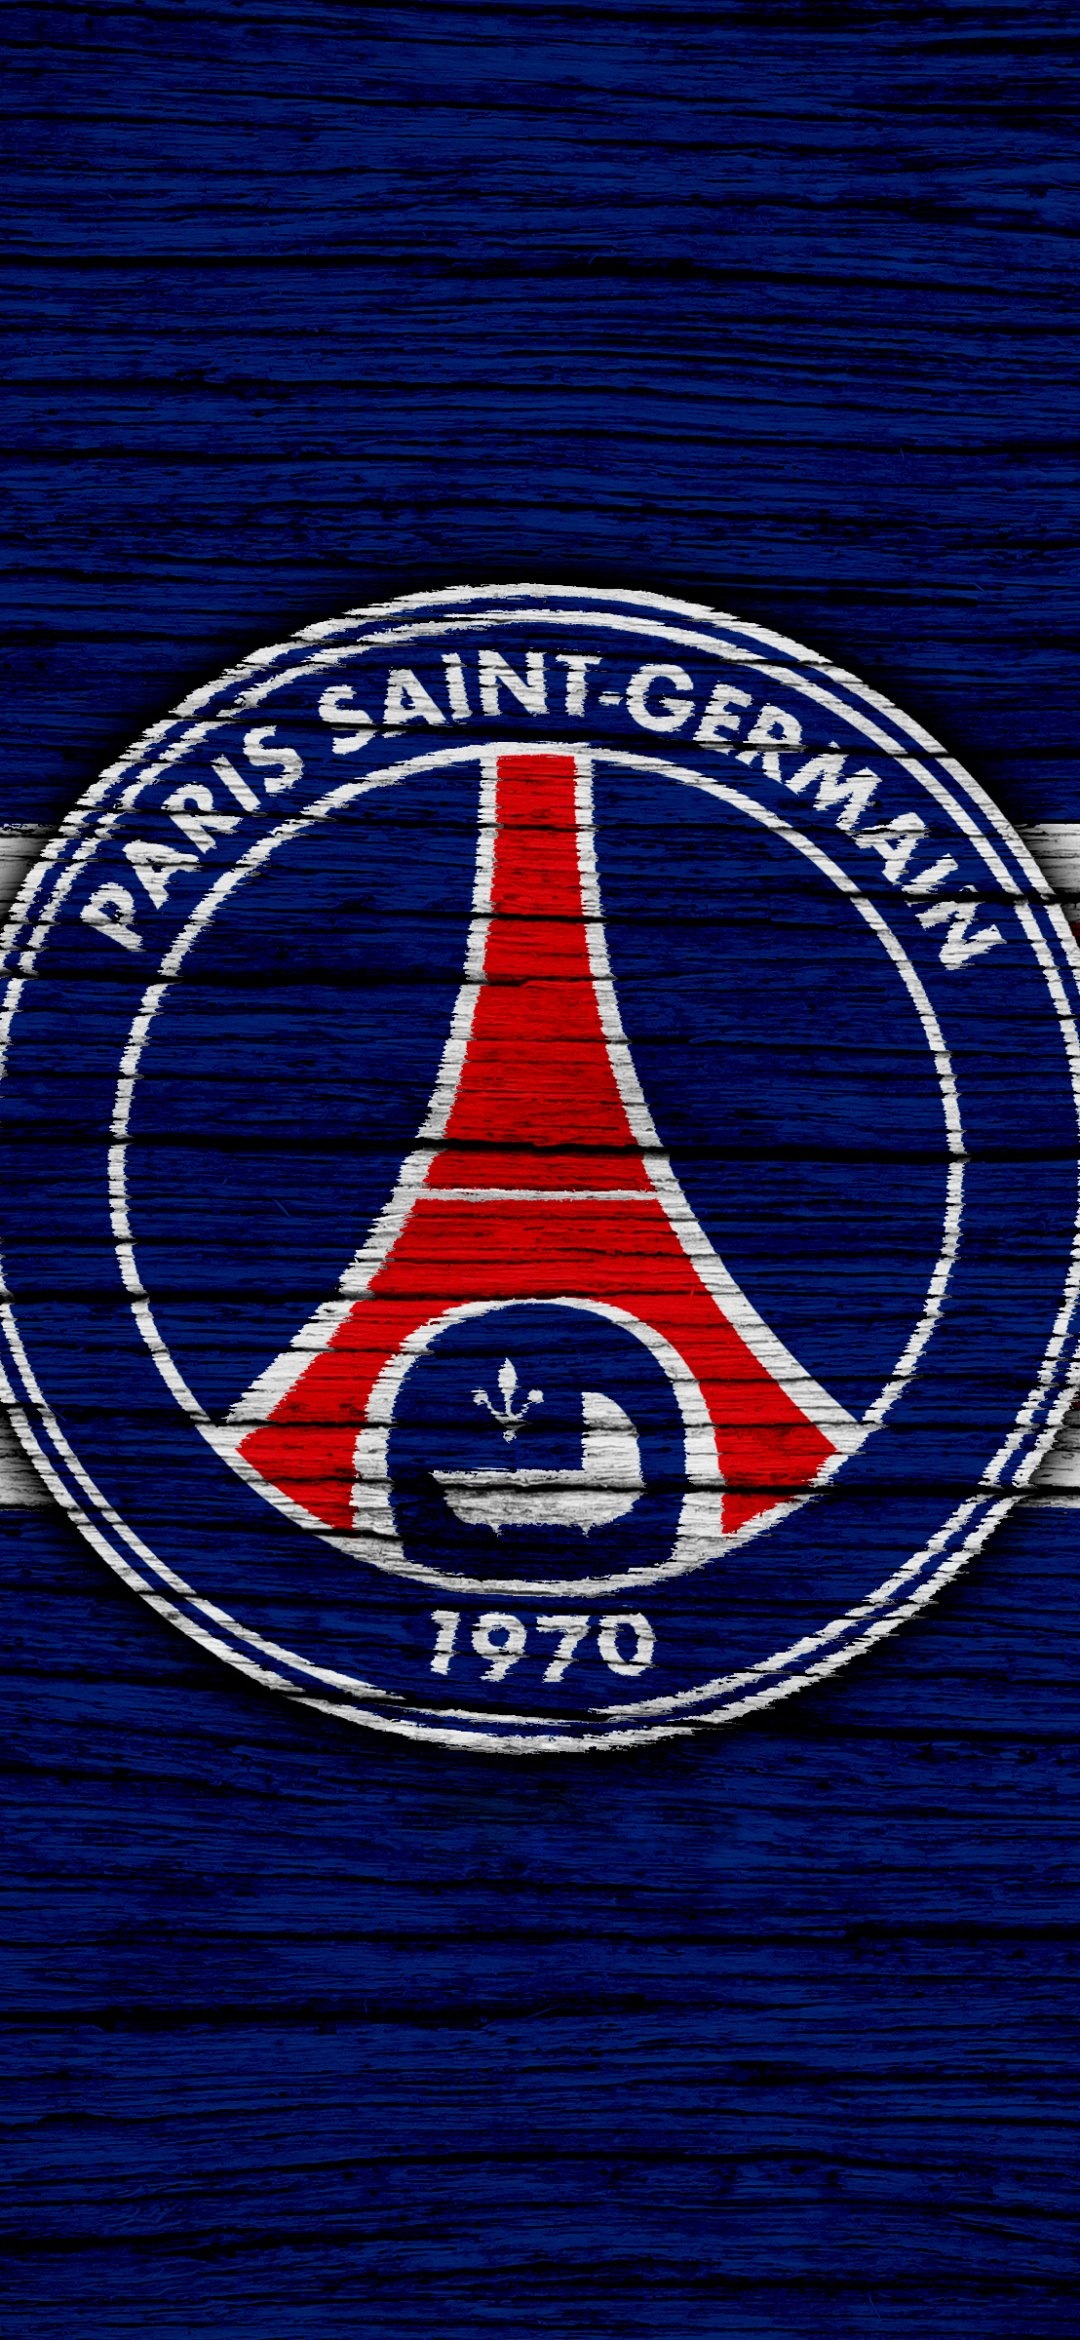 Paris Saint-Germain: The richest club in France and one of the wealthiest in the world. 1080x2340 HD Wallpaper.